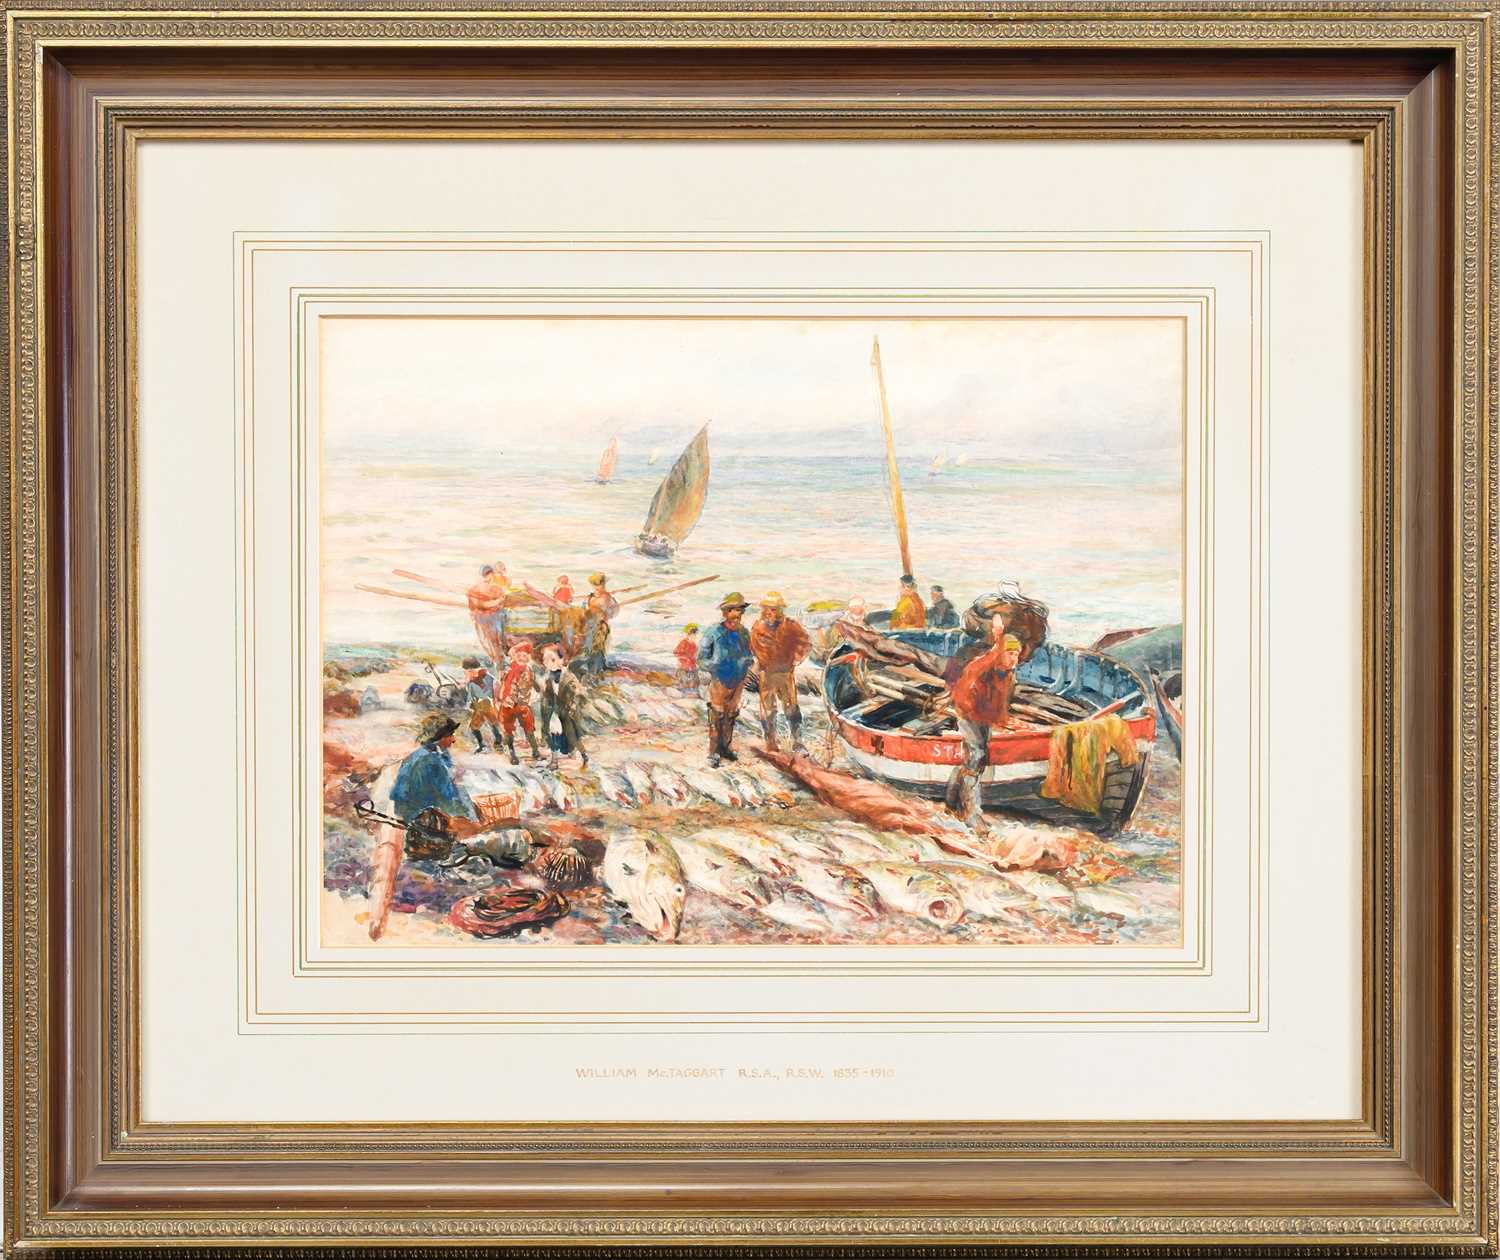 Lot 764 - ATTRIBUTED TO WILLIAM MCTAGGART RSA RSW (SCOTTISH 1835 - 1910)